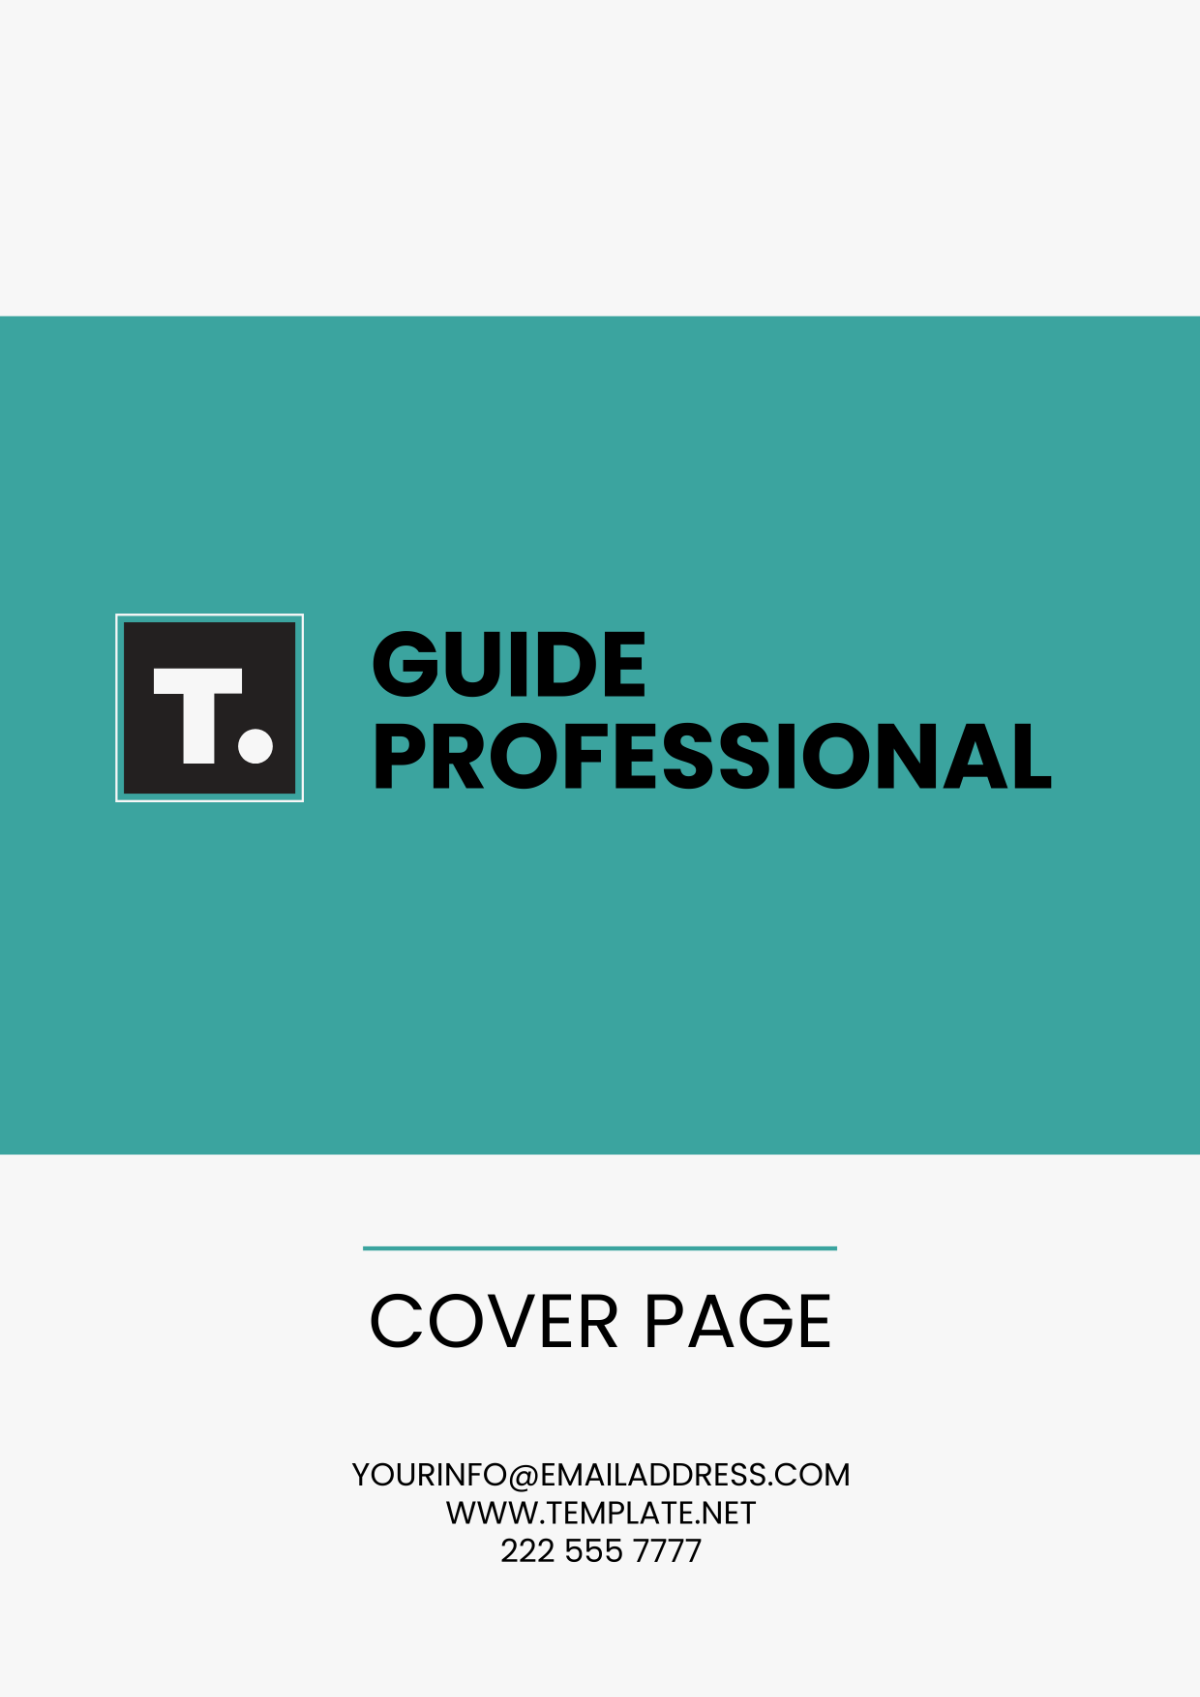 Free Guide Professional Cover Page Template